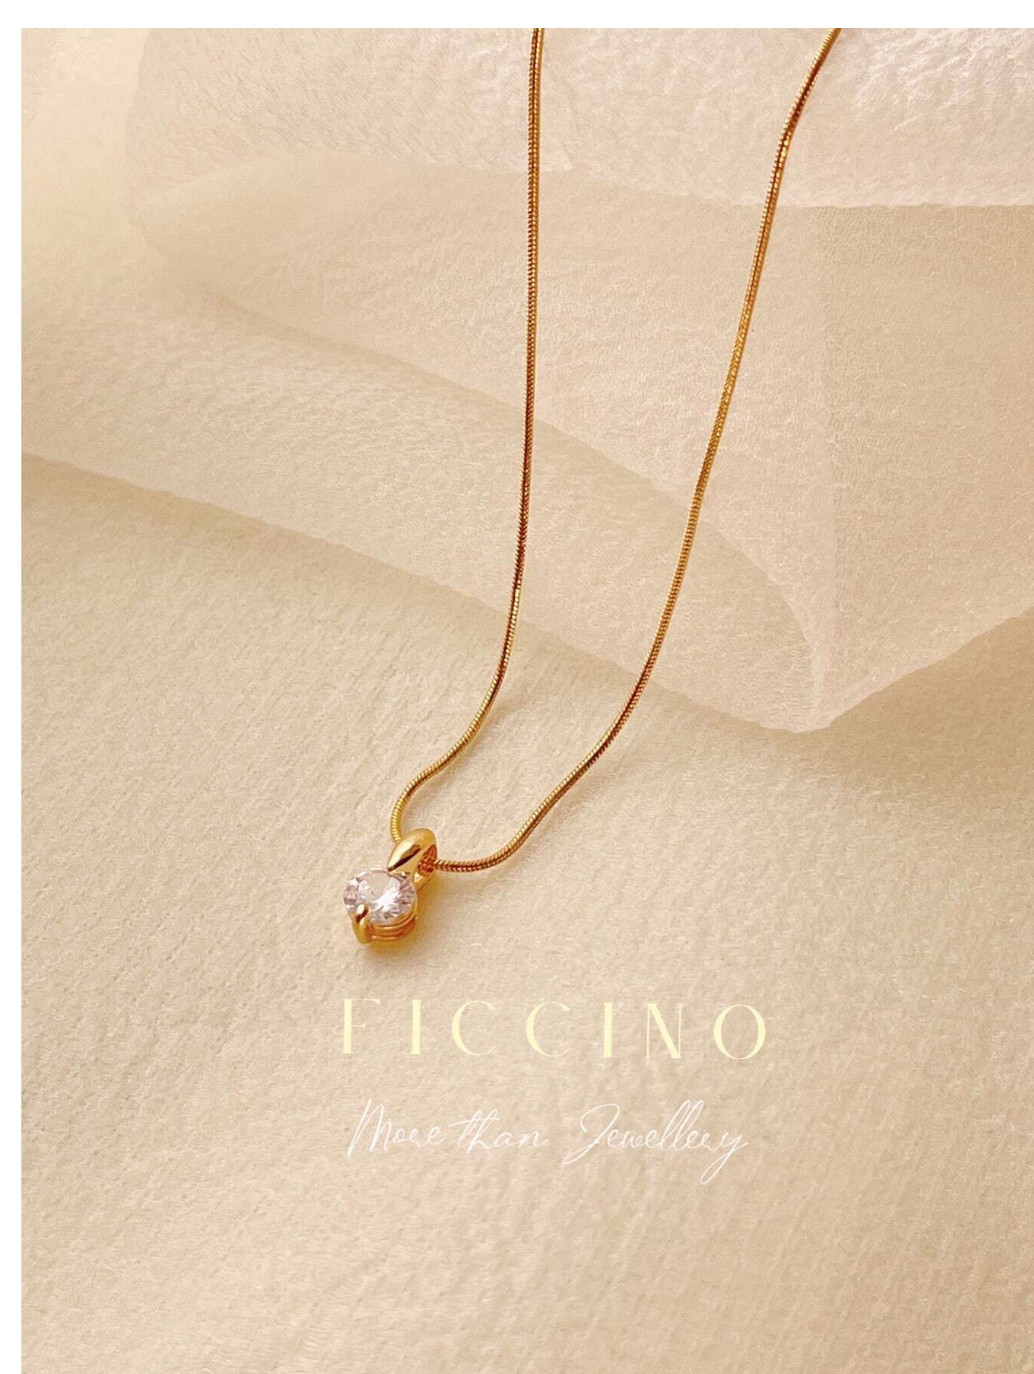 Gleaming Elegance: Classic Gold-Plated Cubic Zirconia Pendant on Titanium Snake Chain – Stylish Everyday Wear and Perfectly Boxed for Festivals and Anniversaries!